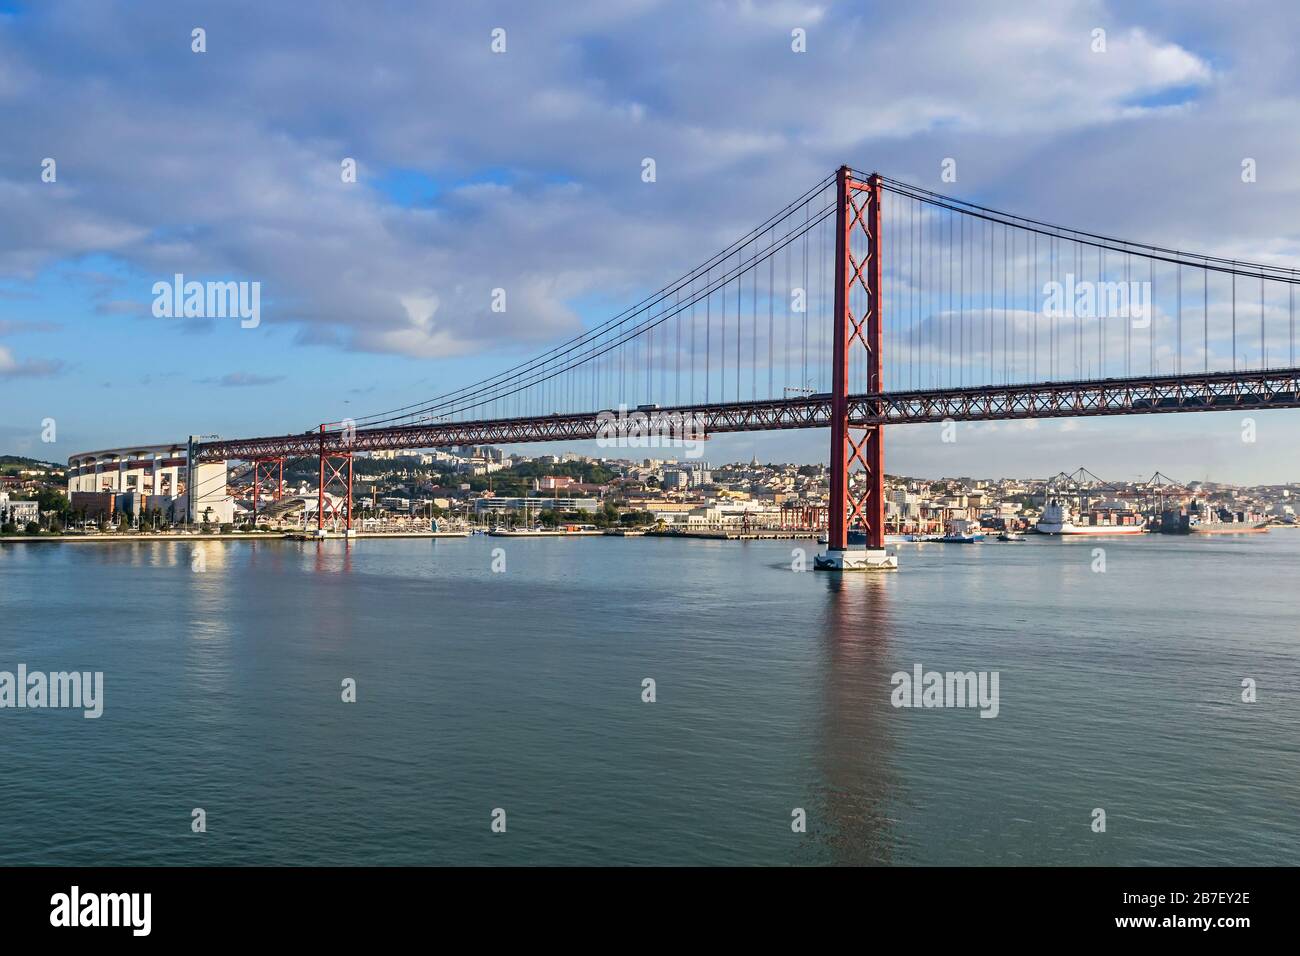 Left (south) bank of the Tagus river and the 25 de Abril Bridge, a suspension bridge connecting the city of Lisbon, capital of Portugal, to the munici Stock Photo